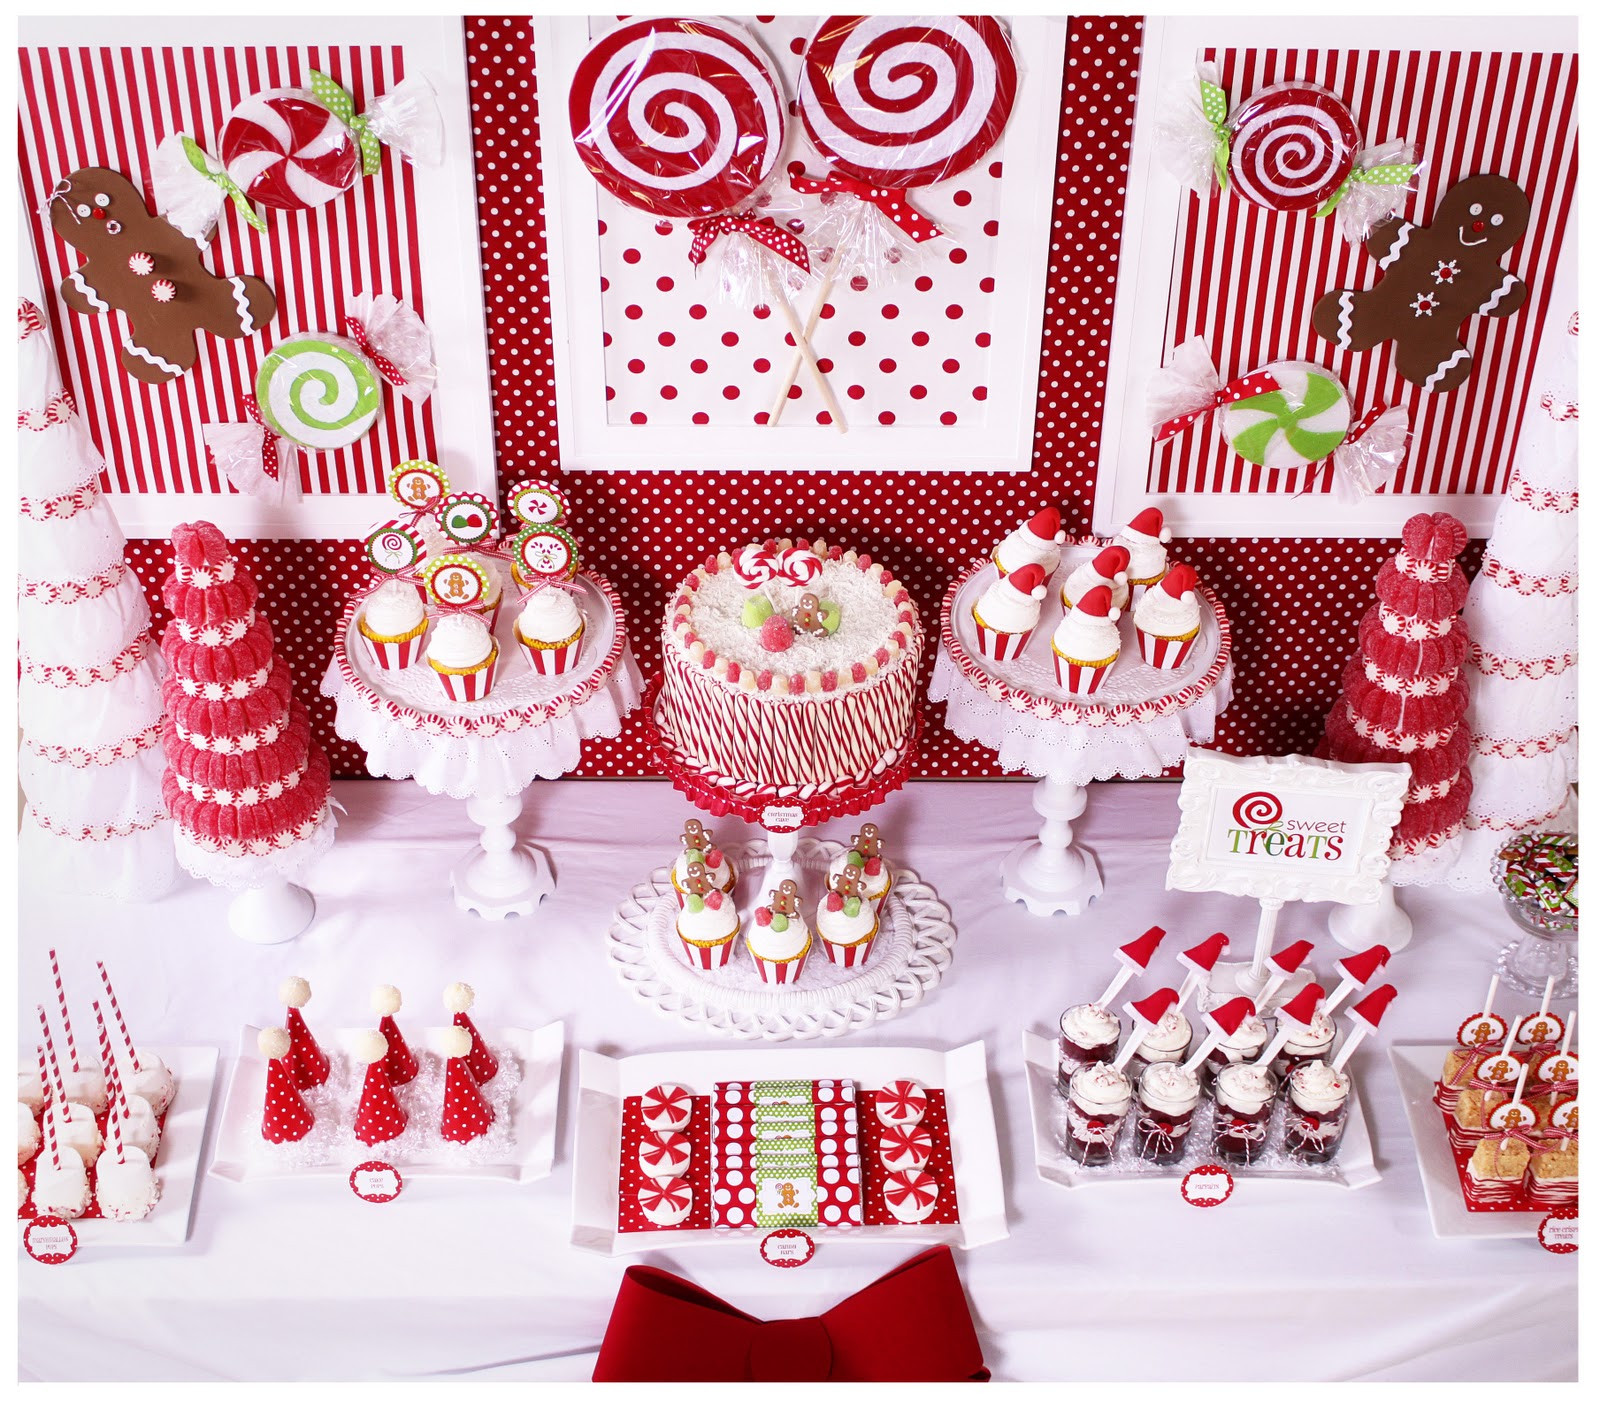 Candy Land Christmas
 Kara s Party Ideas Candy Land Christmas Party